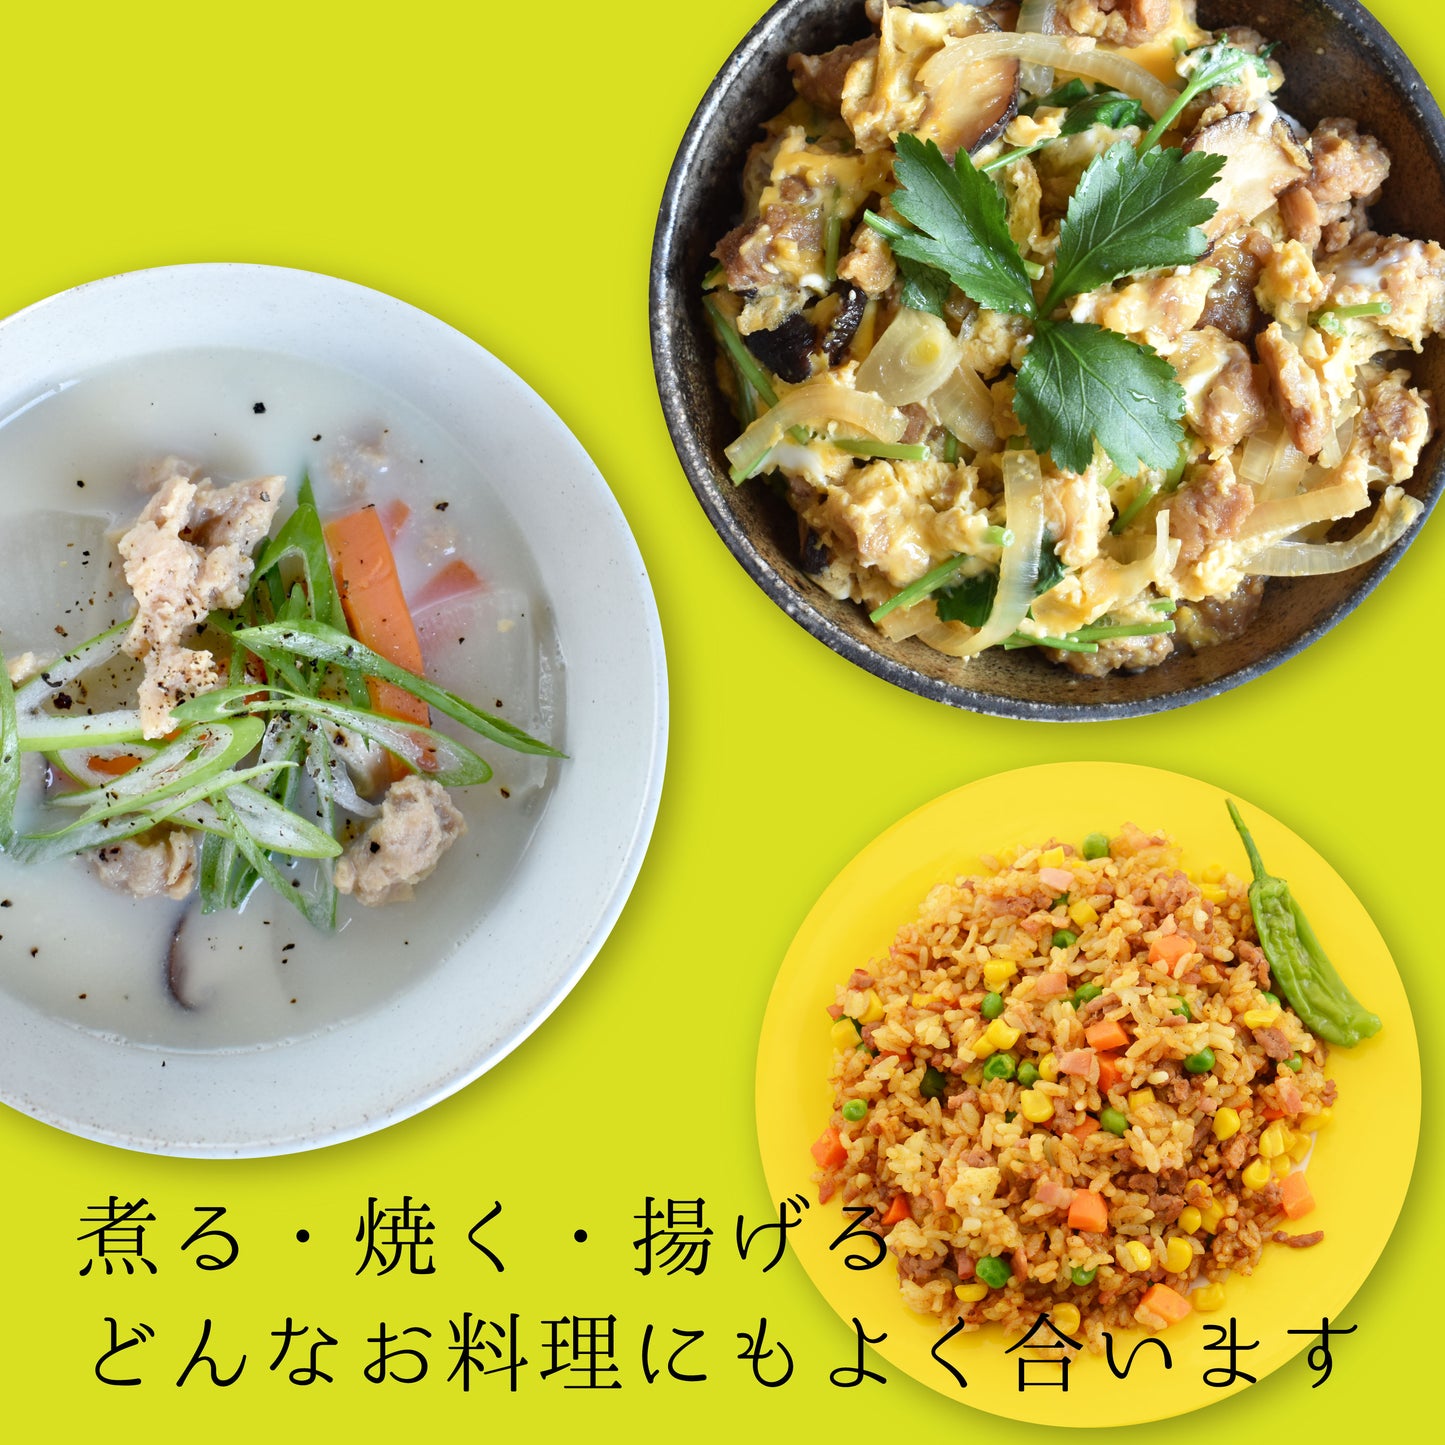 SOY BEAN PROTEIN 大豆ミートボール（120g）